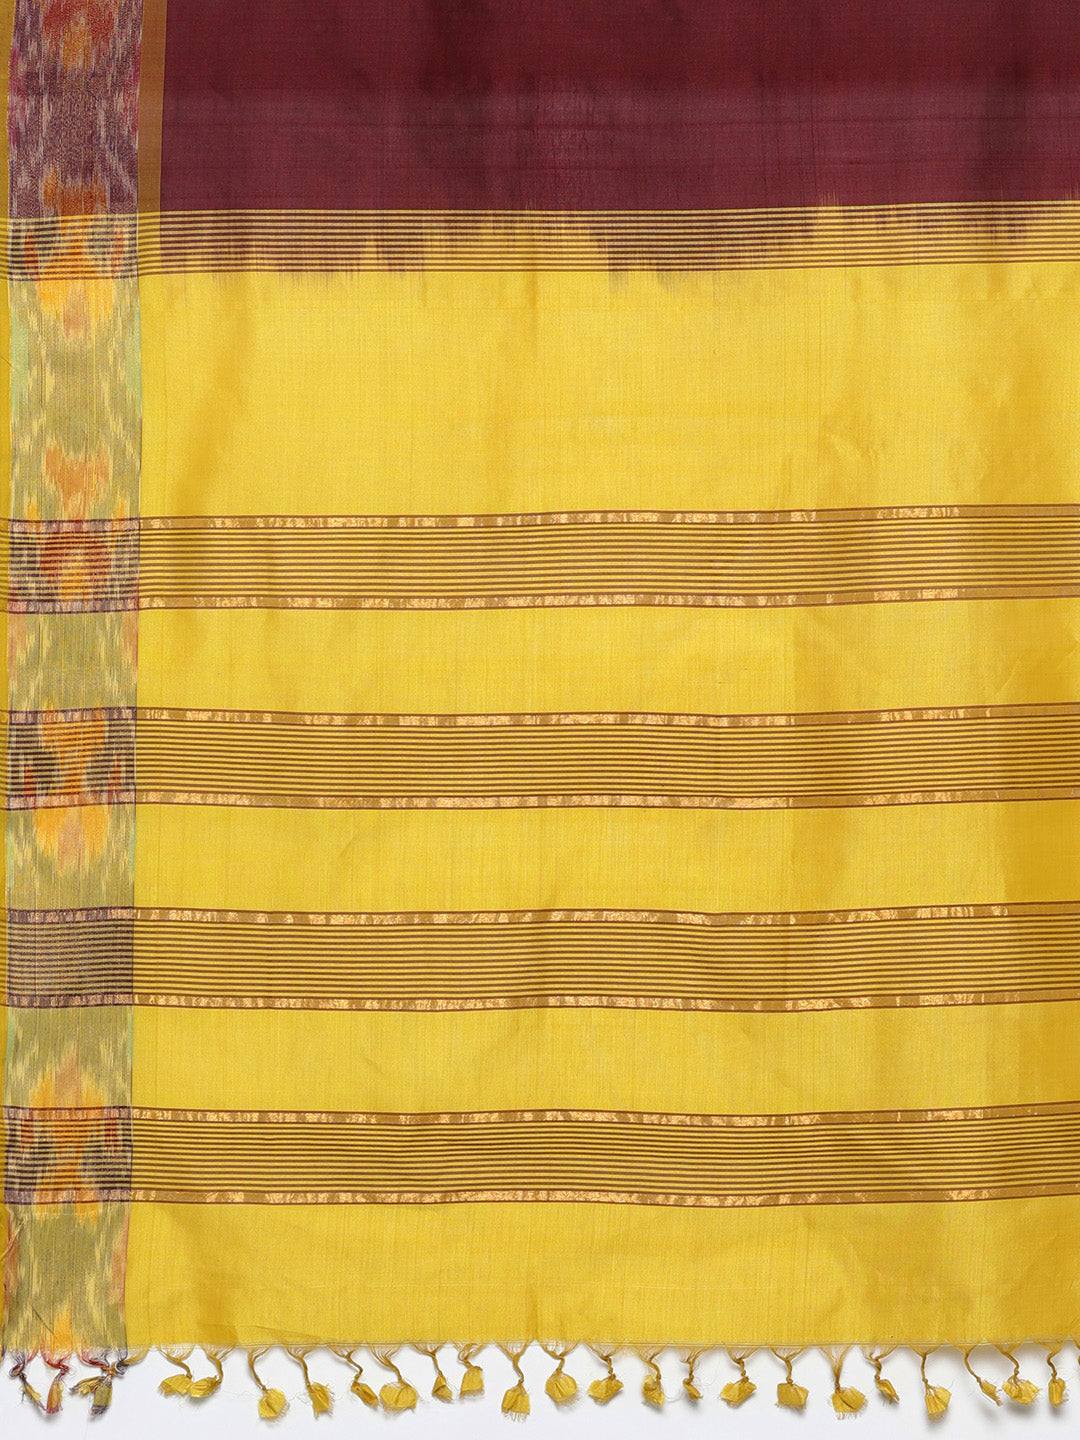 Kalakari India Upppada Cotton Woven Saree With Blouse SKHSSA0014-Saree-Kalakari India-SKHSSA0014-Bollywood, Geographical Indication, Hand Crafted, Heritage Prints, Natural Dyes, Sarees, South Silk, Sustainable Fabrics, Uppada Silk, Woven-[Linen,Ethnic,wear,Fashionista,Handloom,Handicraft,Indigo,blockprint,block,print,Cotton,Chanderi,Blue, latest,classy,party,bollywood,trendy,summer,style,traditional,formal,elegant,unique,style,hand,block,print, dabu,booti,gift,present,glamorous,affordable,collec